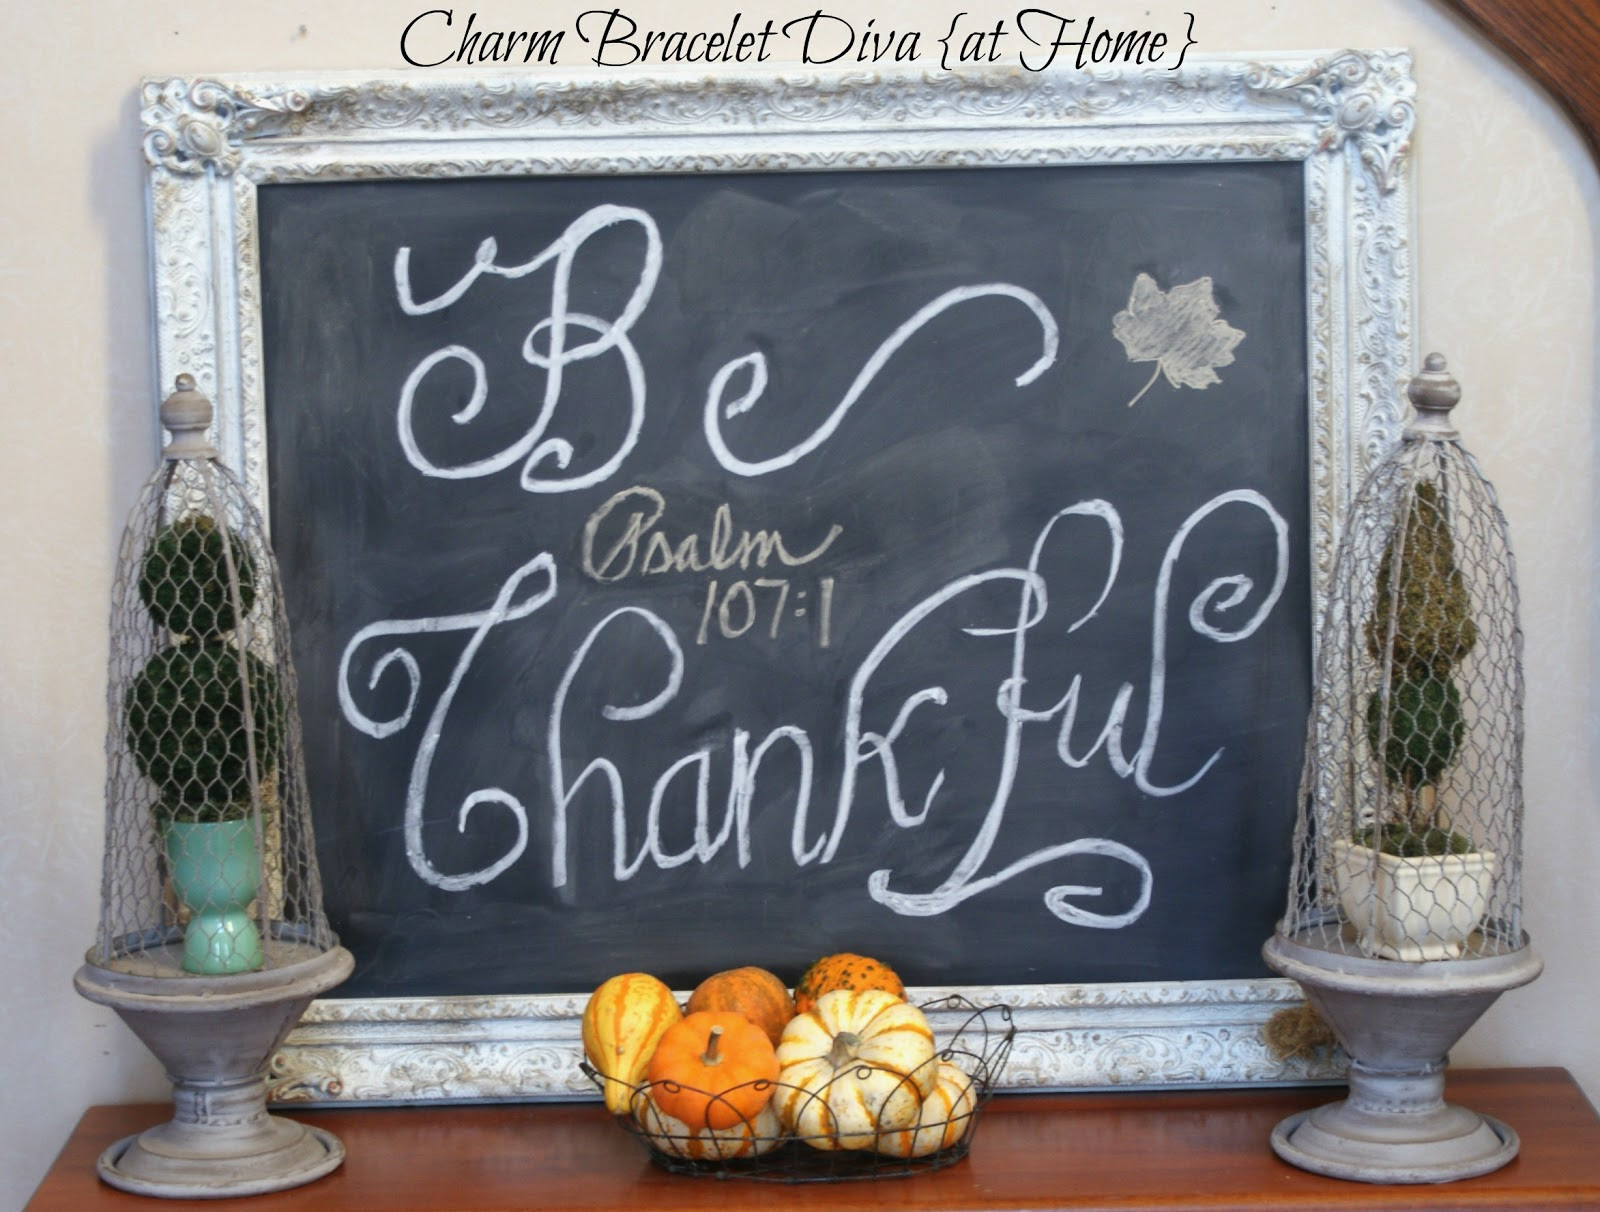 Thanksgiving Chalkboard Ideas
 Our Hopeful Home Some Thanksgiving Chalkboard Ideas